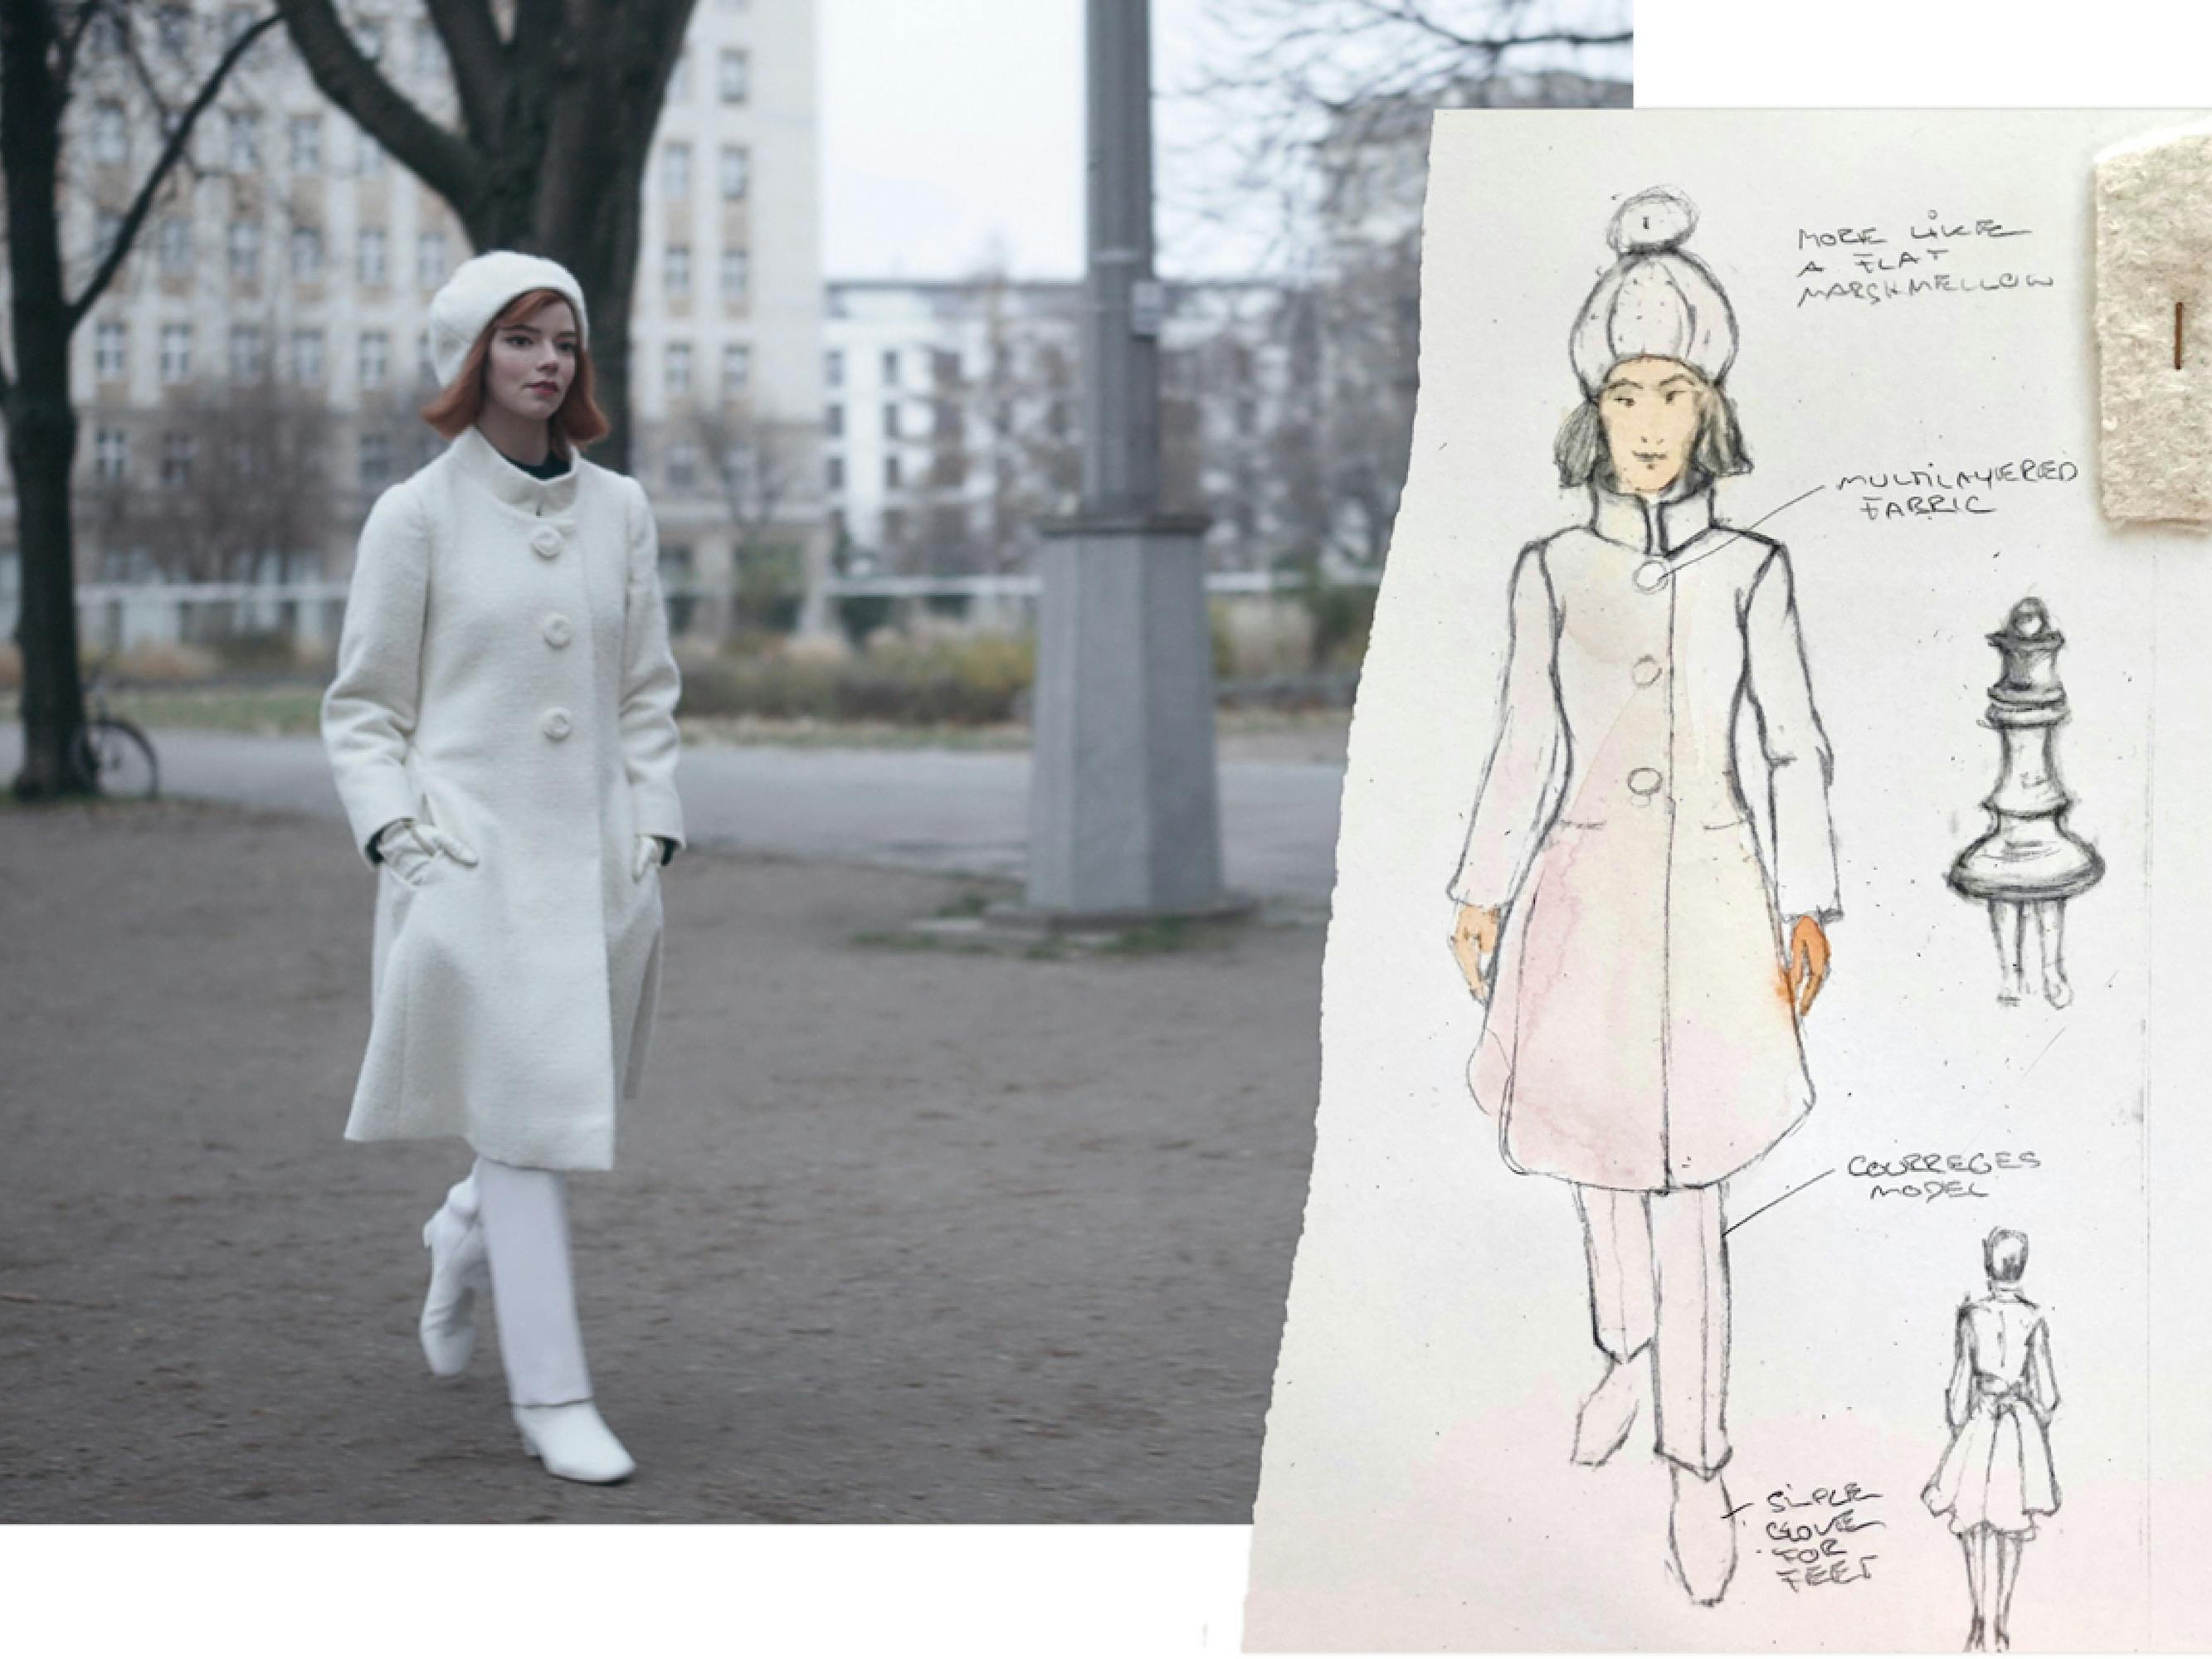 Beth in her all-white ensemble, strutting through the streets of Moscow. A still from the series is matched with its corresponding costume sketch, which compares the costume’s silhouette with that of the queen piece.